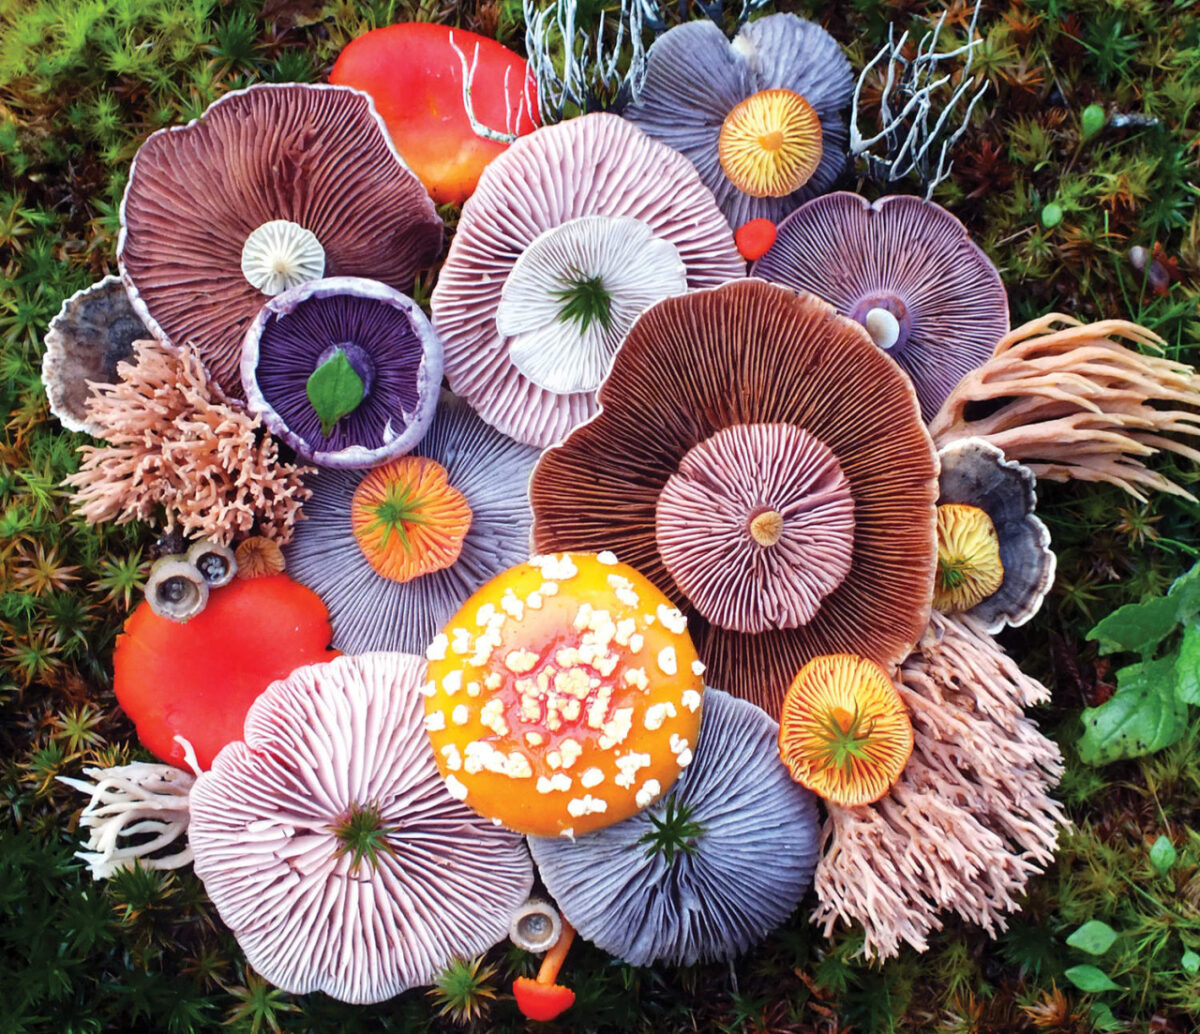 Colorful Arrangements Made Of Mushrooms By Jill Bliss 8